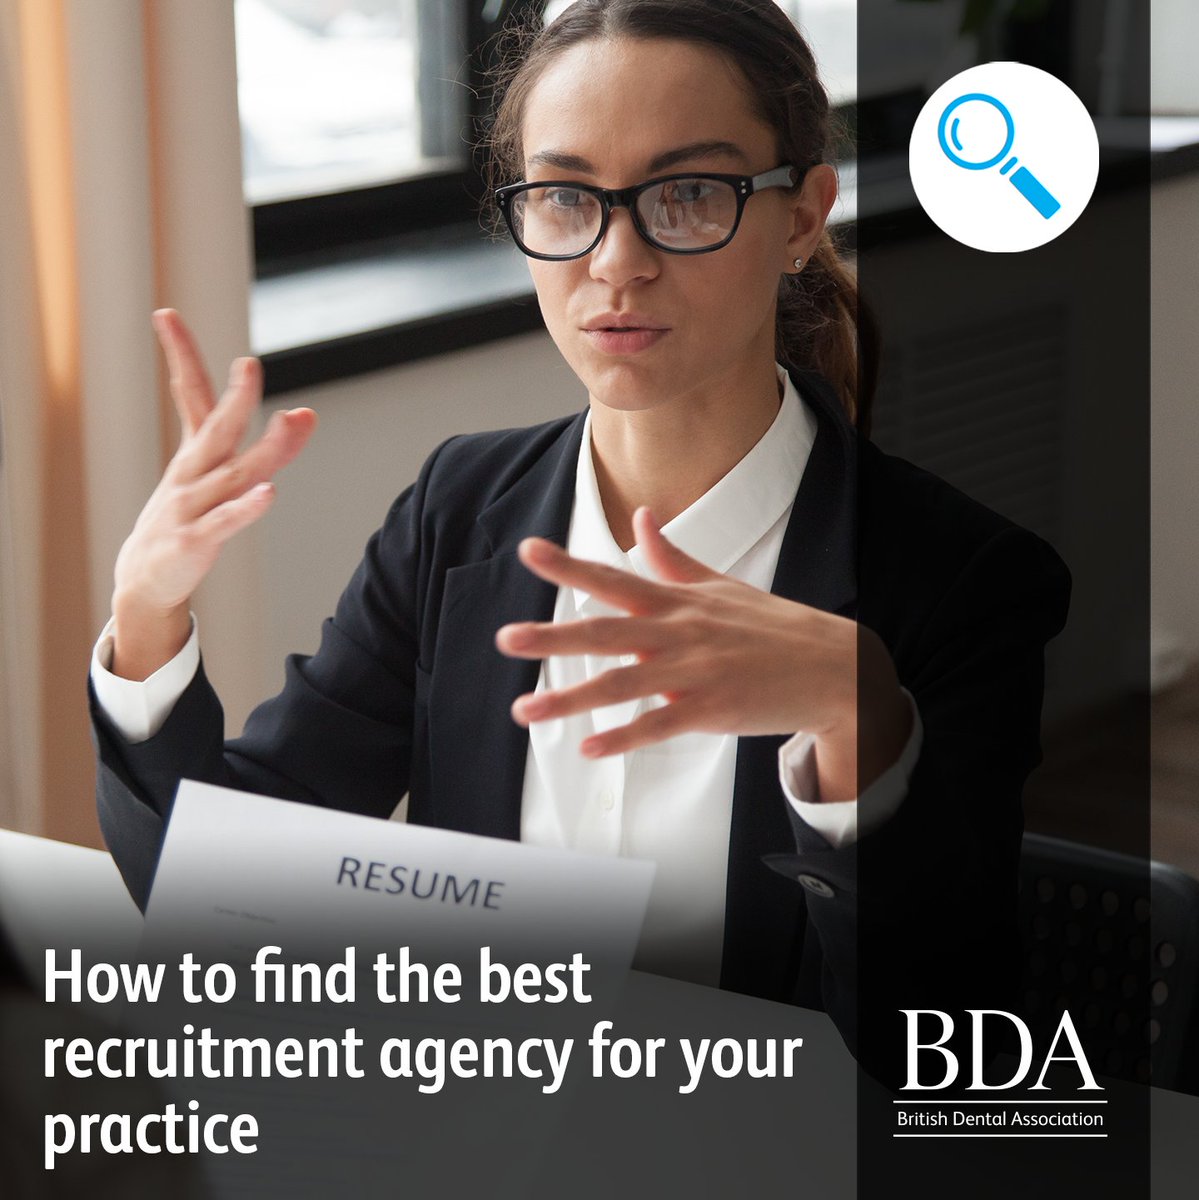 Hiring staff can be a difficult task. Do you know how to find the best recruitment agency to help you? Read our top tips here: bit.ly/4aPMAPd